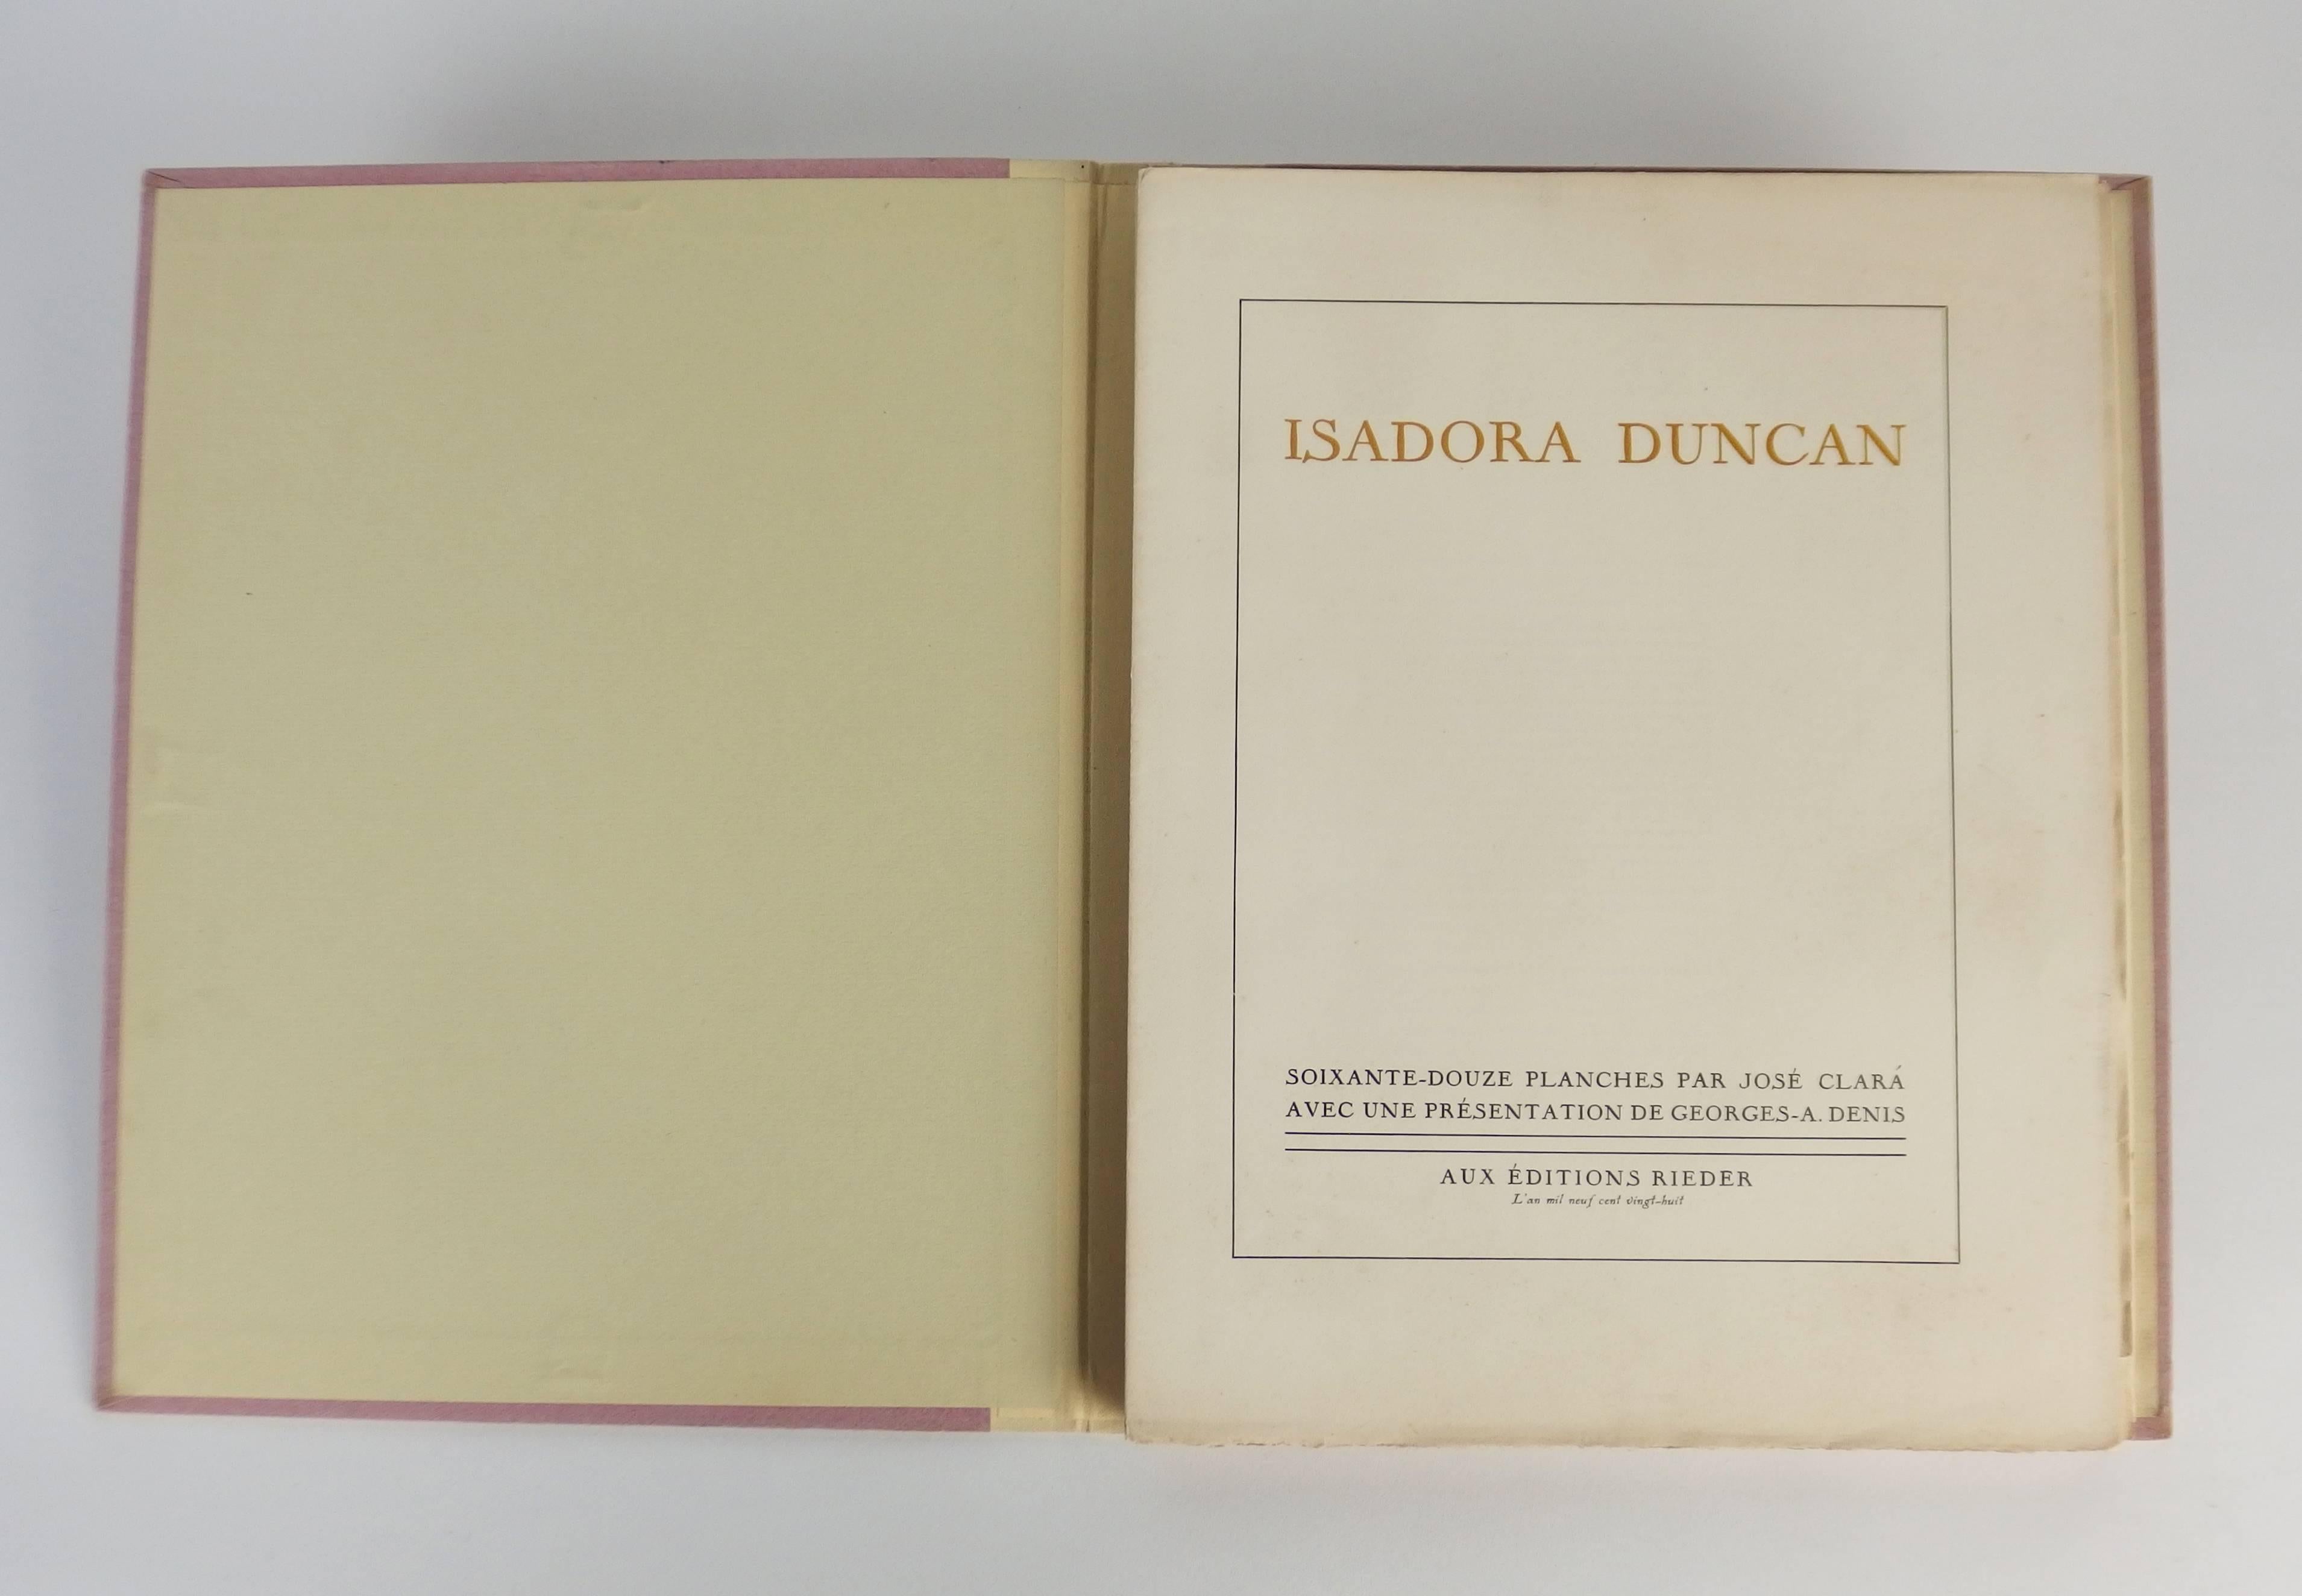 A book edited in 1928, after Isadora Duncan's death, by Rieder editions.
This books includes a text by Georges A Denis & 72 plates after Jose Clara representing Duncan's movements dance.
Jose Clara was a catalan spanish